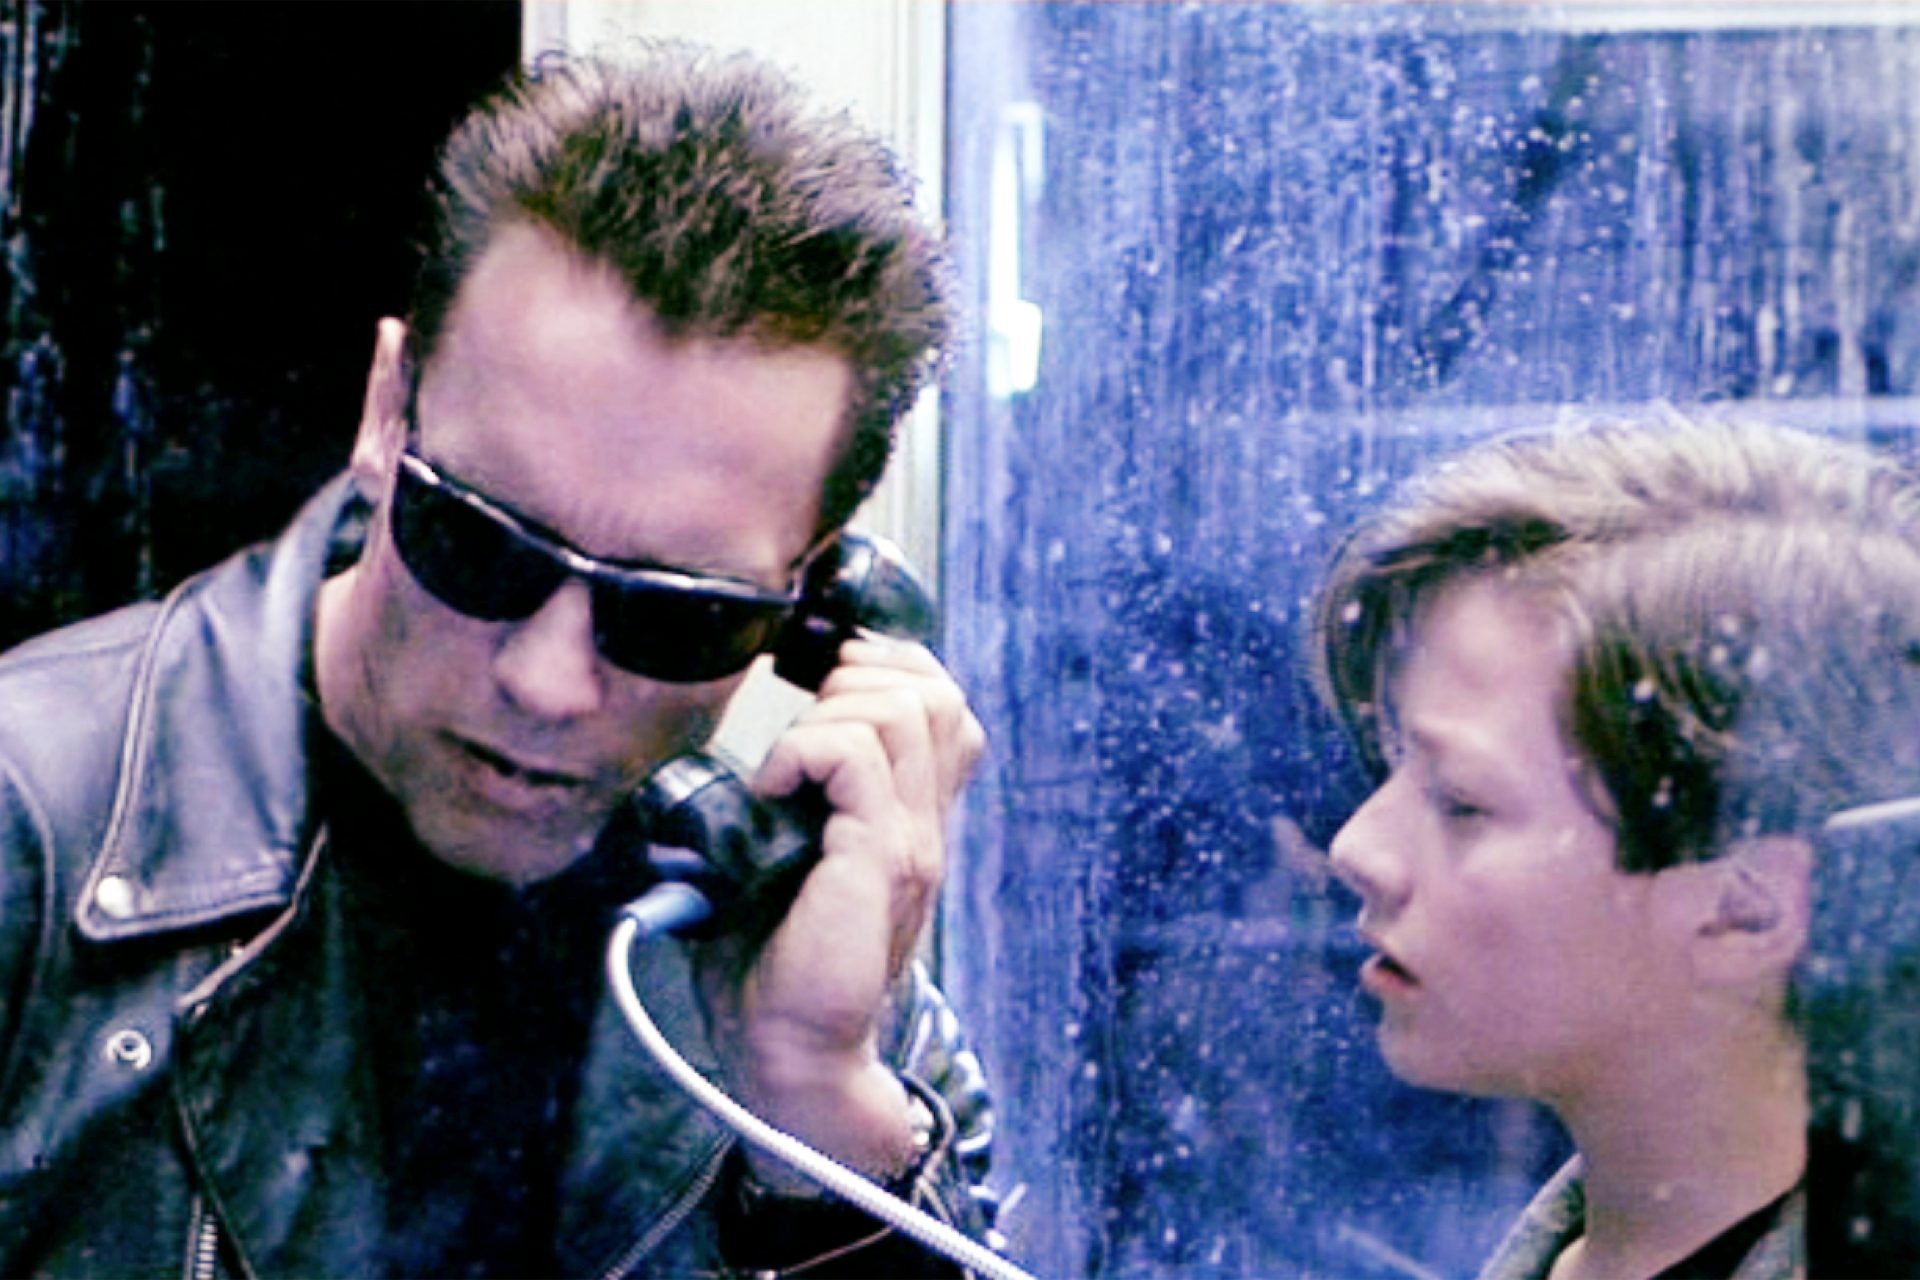 <p>Terminator 2: Judgement Day - The Terminator sequel improved on the original with a similar plot but a much scarier villain than Arnold Schwarzenegger, the indestructible T-1000 who arrived from the future to kill John Connor.</p>